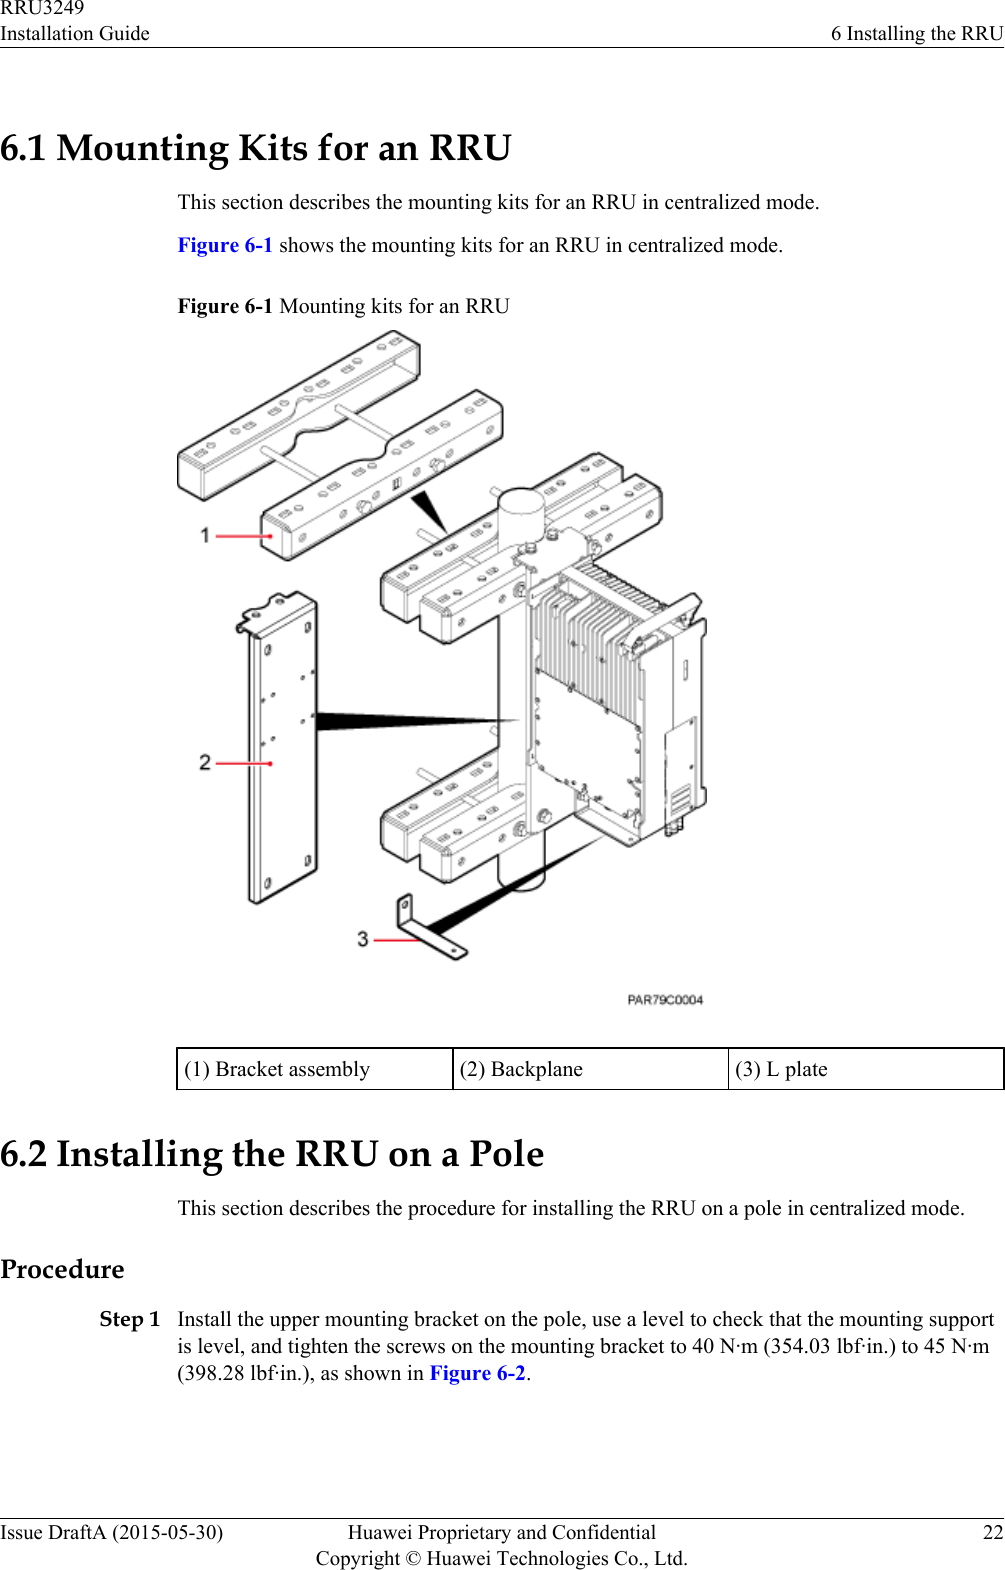 6.1 Mounting Kits for an RRUThis section describes the mounting kits for an RRU in centralized mode.Figure 6-1 shows the mounting kits for an RRU in centralized mode.Figure 6-1 Mounting kits for an RRU(1) Bracket assembly (2) Backplane (3) L plate6.2 Installing the RRU on a PoleThis section describes the procedure for installing the RRU on a pole in centralized mode.ProcedureStep 1 Install the upper mounting bracket on the pole, use a level to check that the mounting supportis level, and tighten the screws on the mounting bracket to 40 N·m (354.03 lbf·in.) to 45 N·m(398.28 lbf·in.), as shown in Figure 6-2.RRU3249Installation Guide 6 Installing the RRUIssue DraftA (2015-05-30) Huawei Proprietary and ConfidentialCopyright © Huawei Technologies Co., Ltd.22